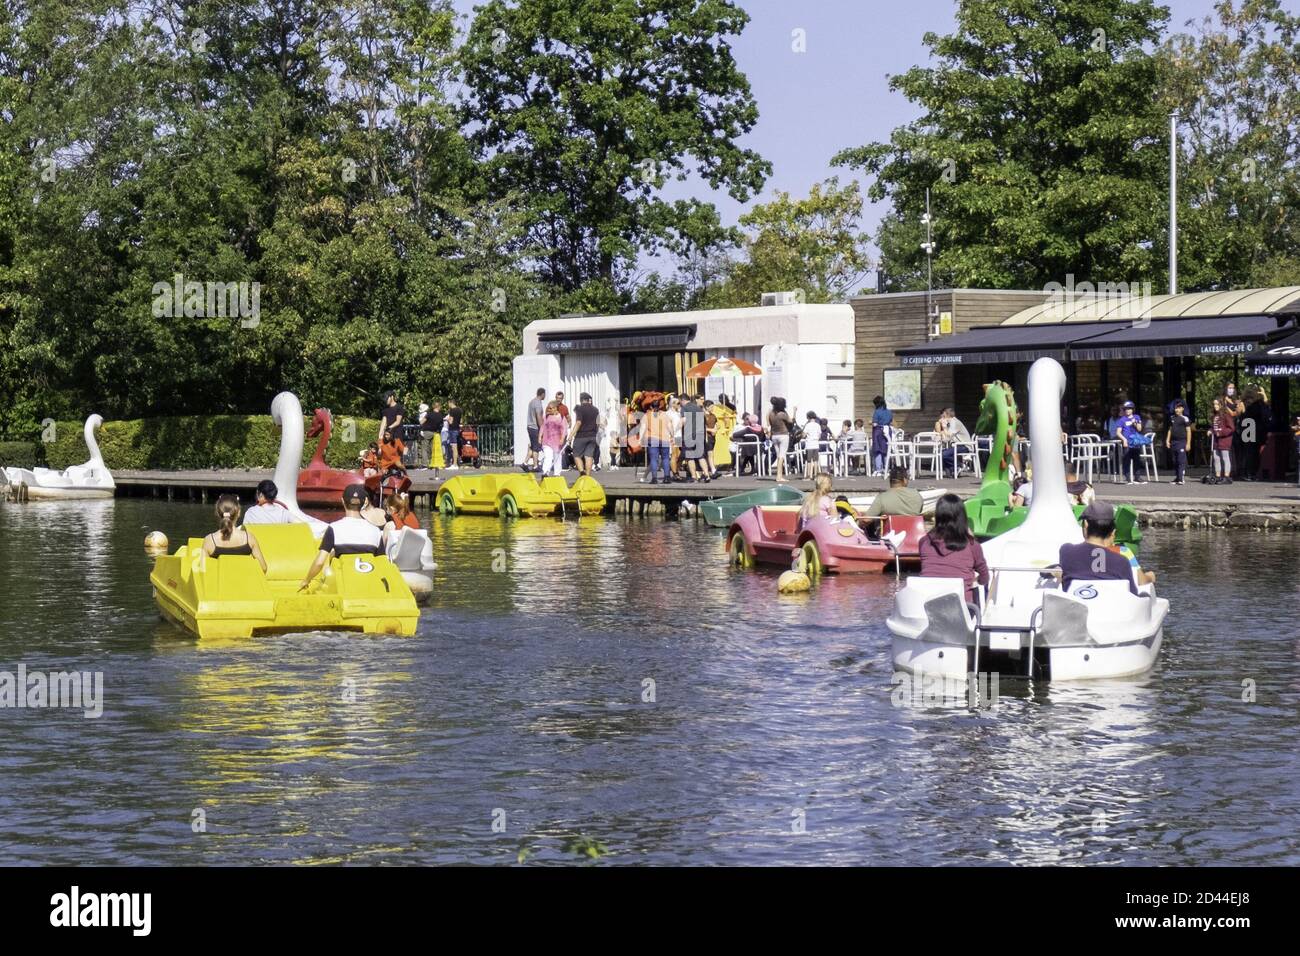 LONDO, UNITED KINGDOM - Sep 20, 2020: The pedalo's on the boating lake in the grounds of Alexandra Palace, Londo Stock Photo